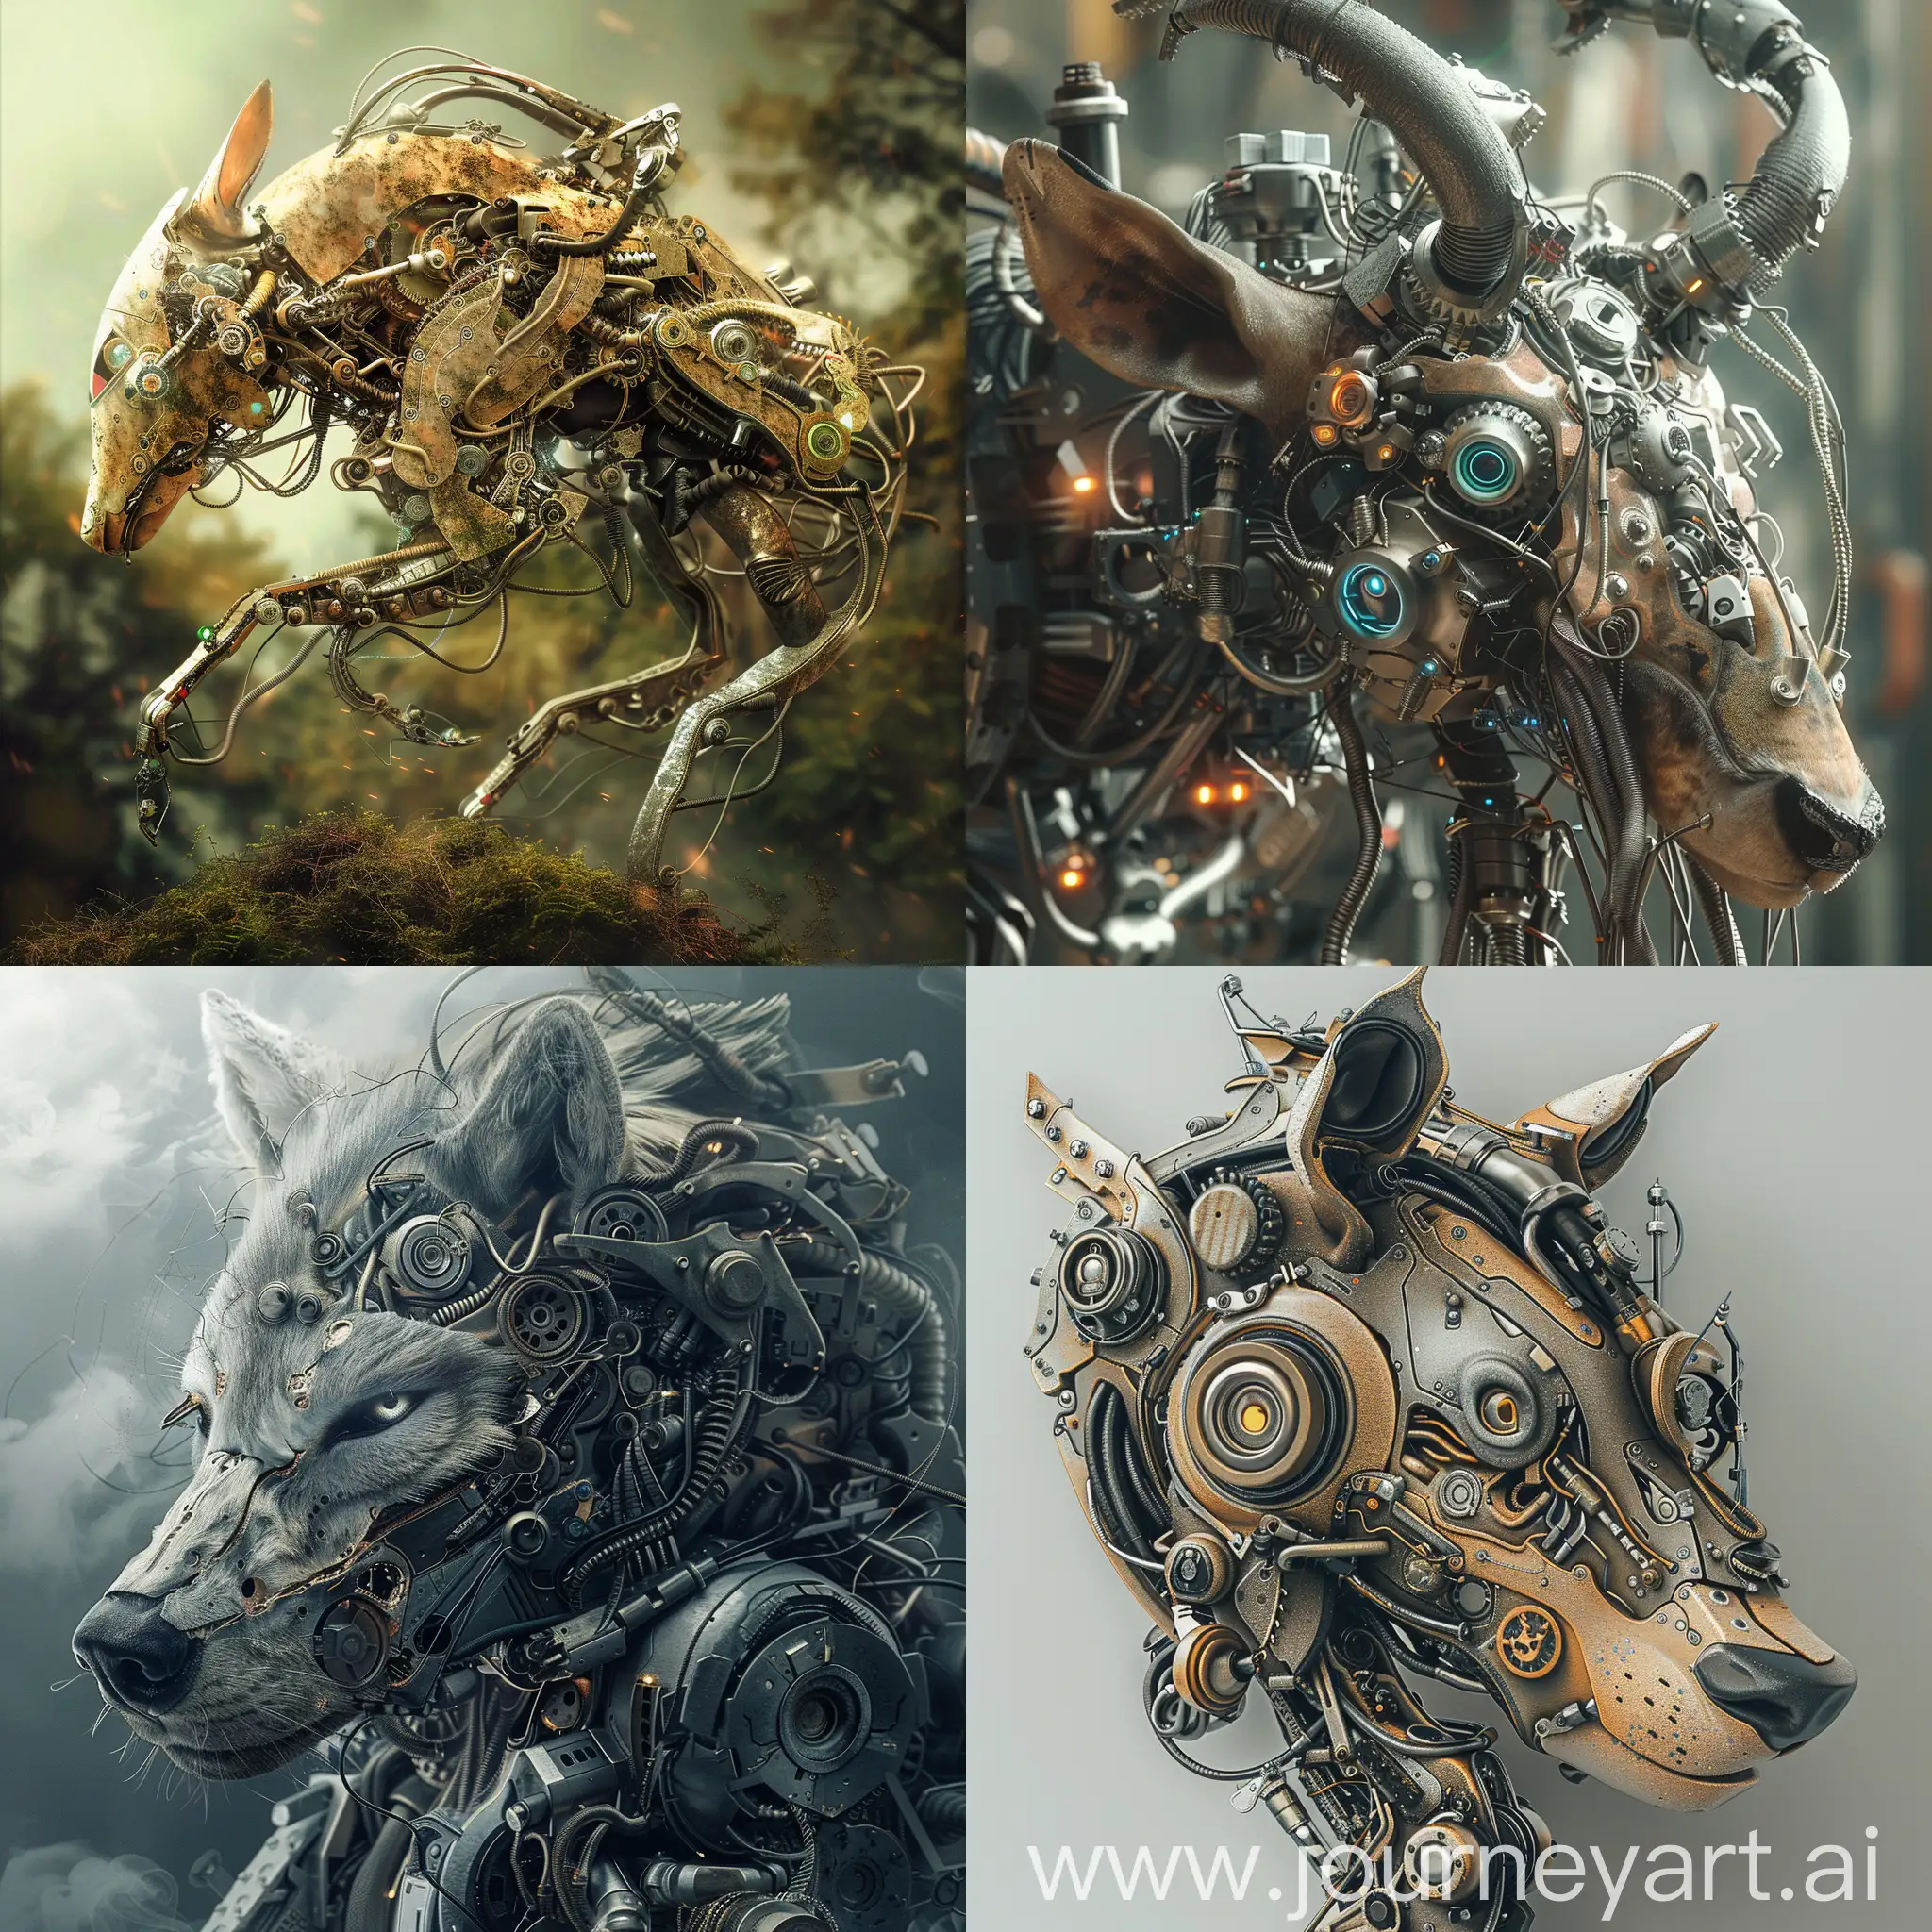 Create an image that combines mechanical elements and animal characteristics to convey the idea of ​​technology and nature merging in a unique synthesis